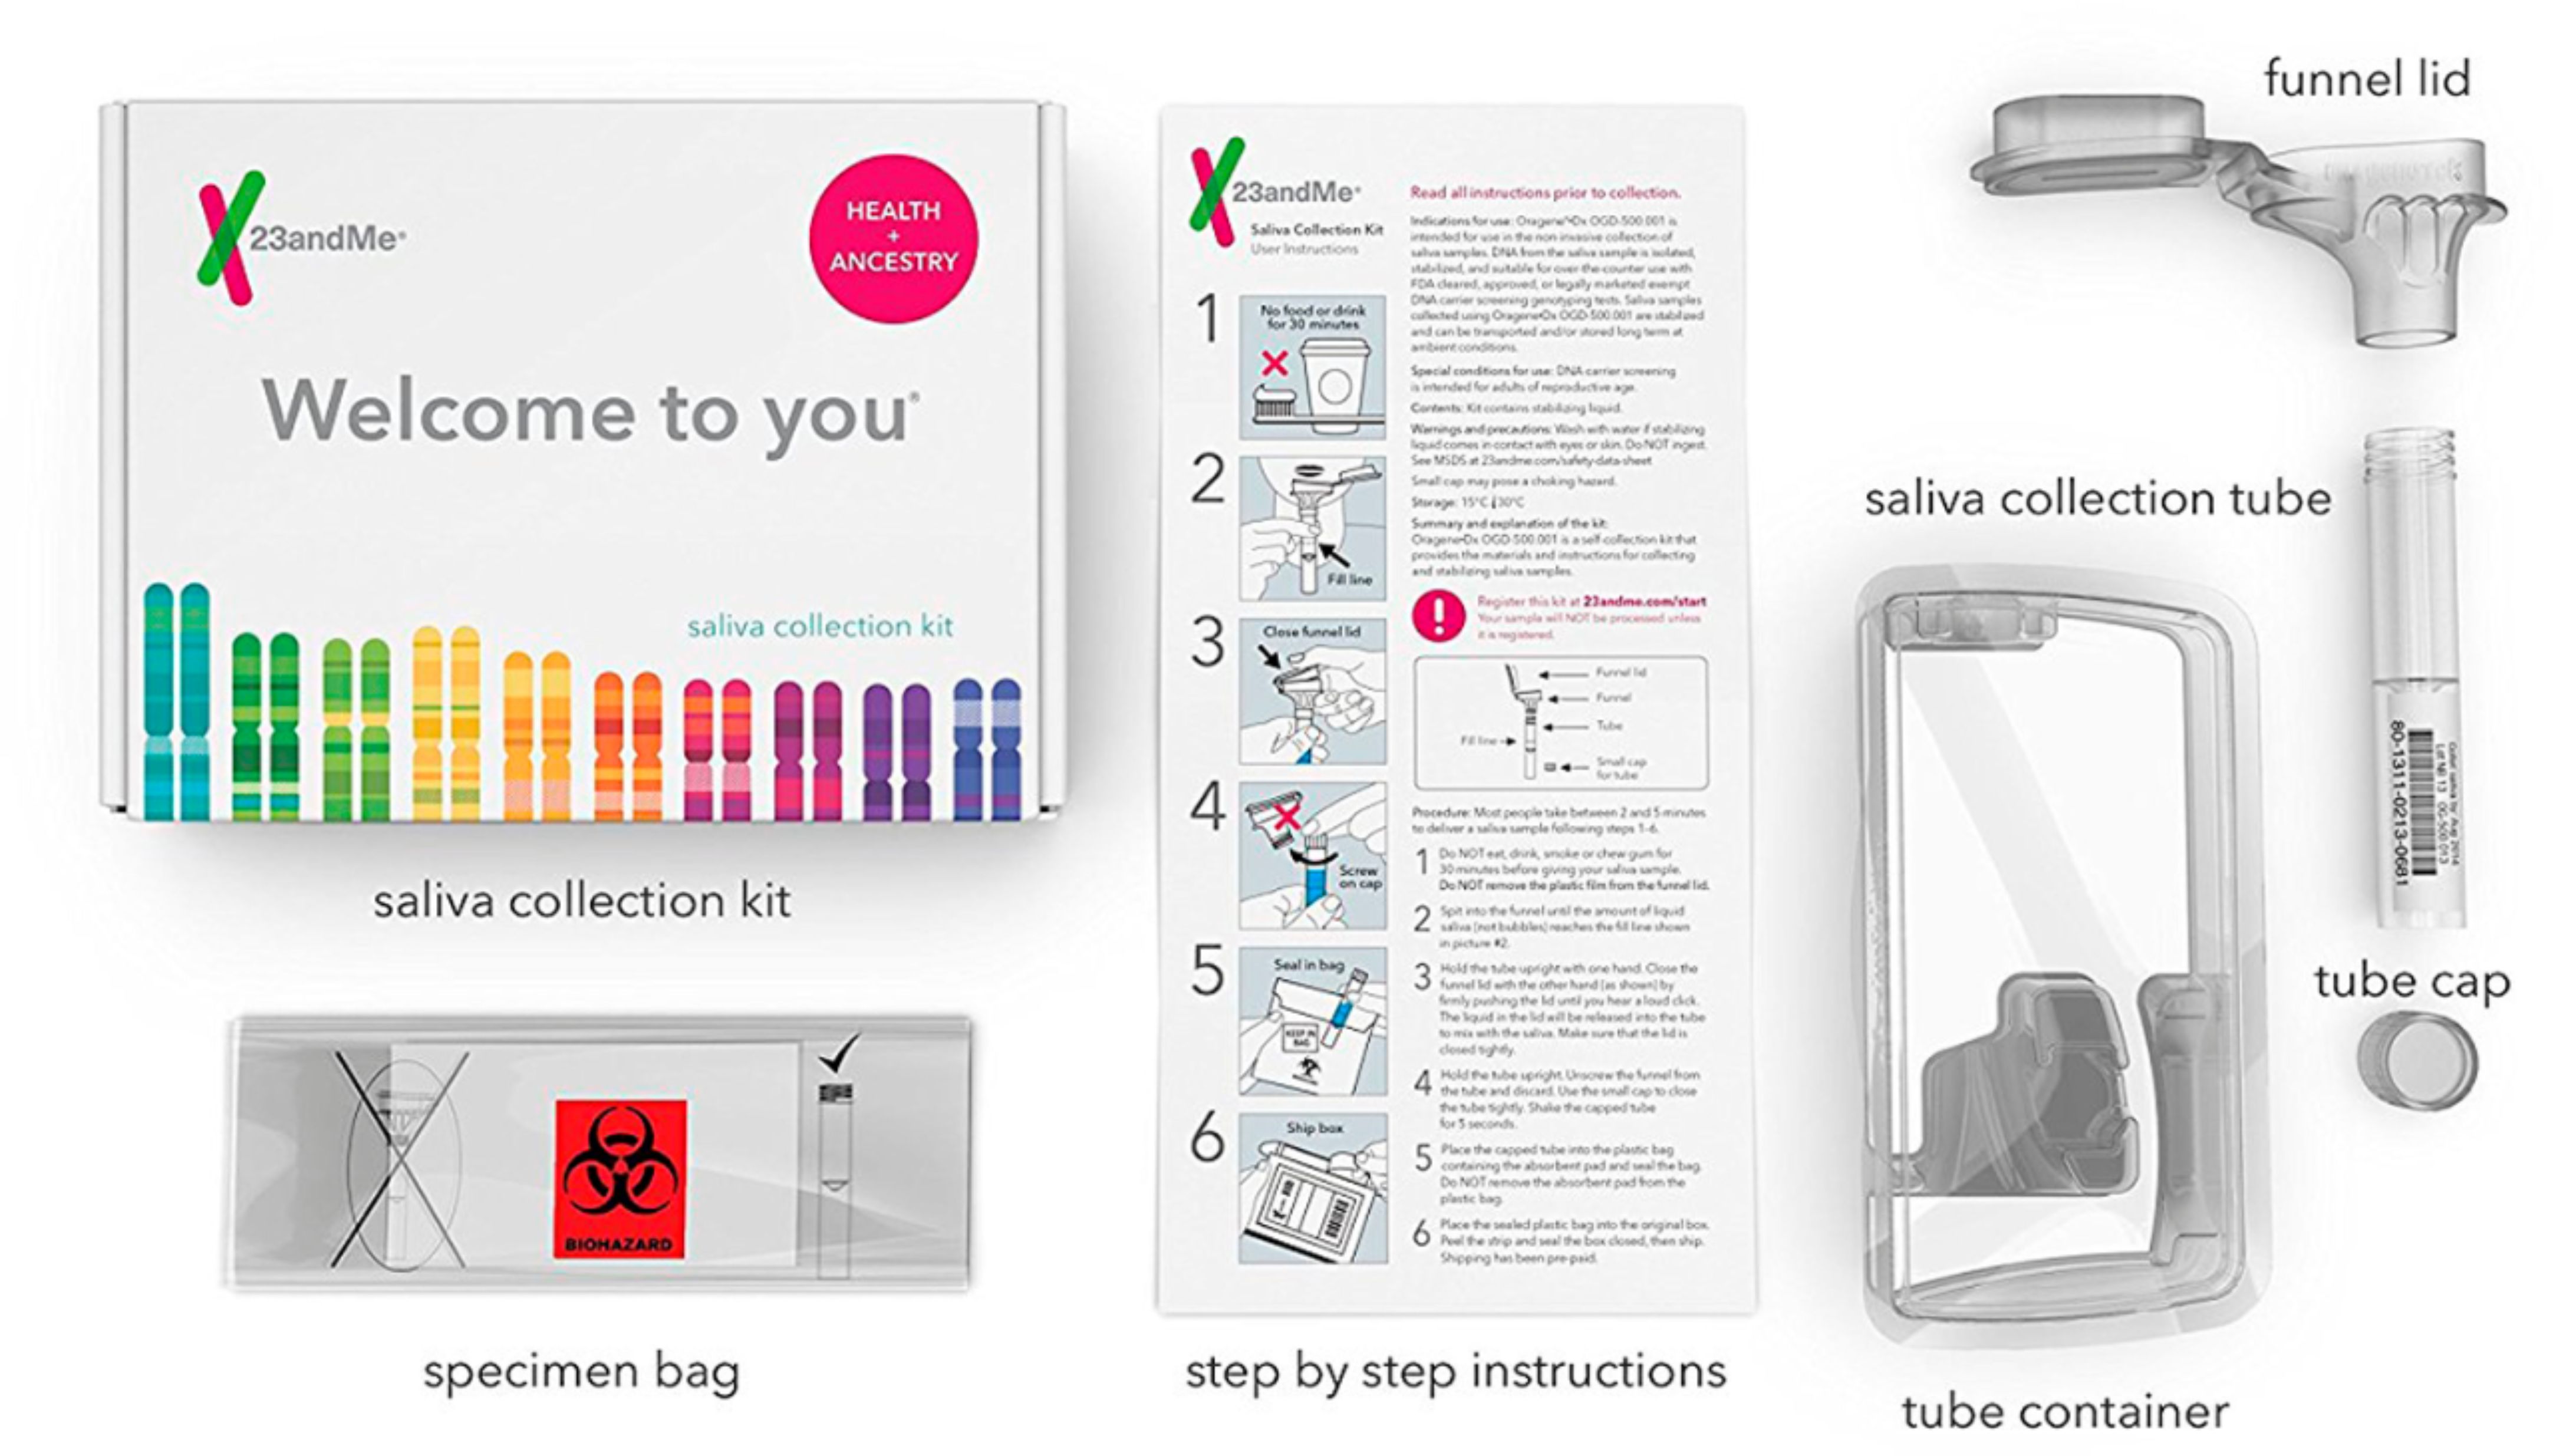 The 23andMe DNA test kit is still available for 52% off